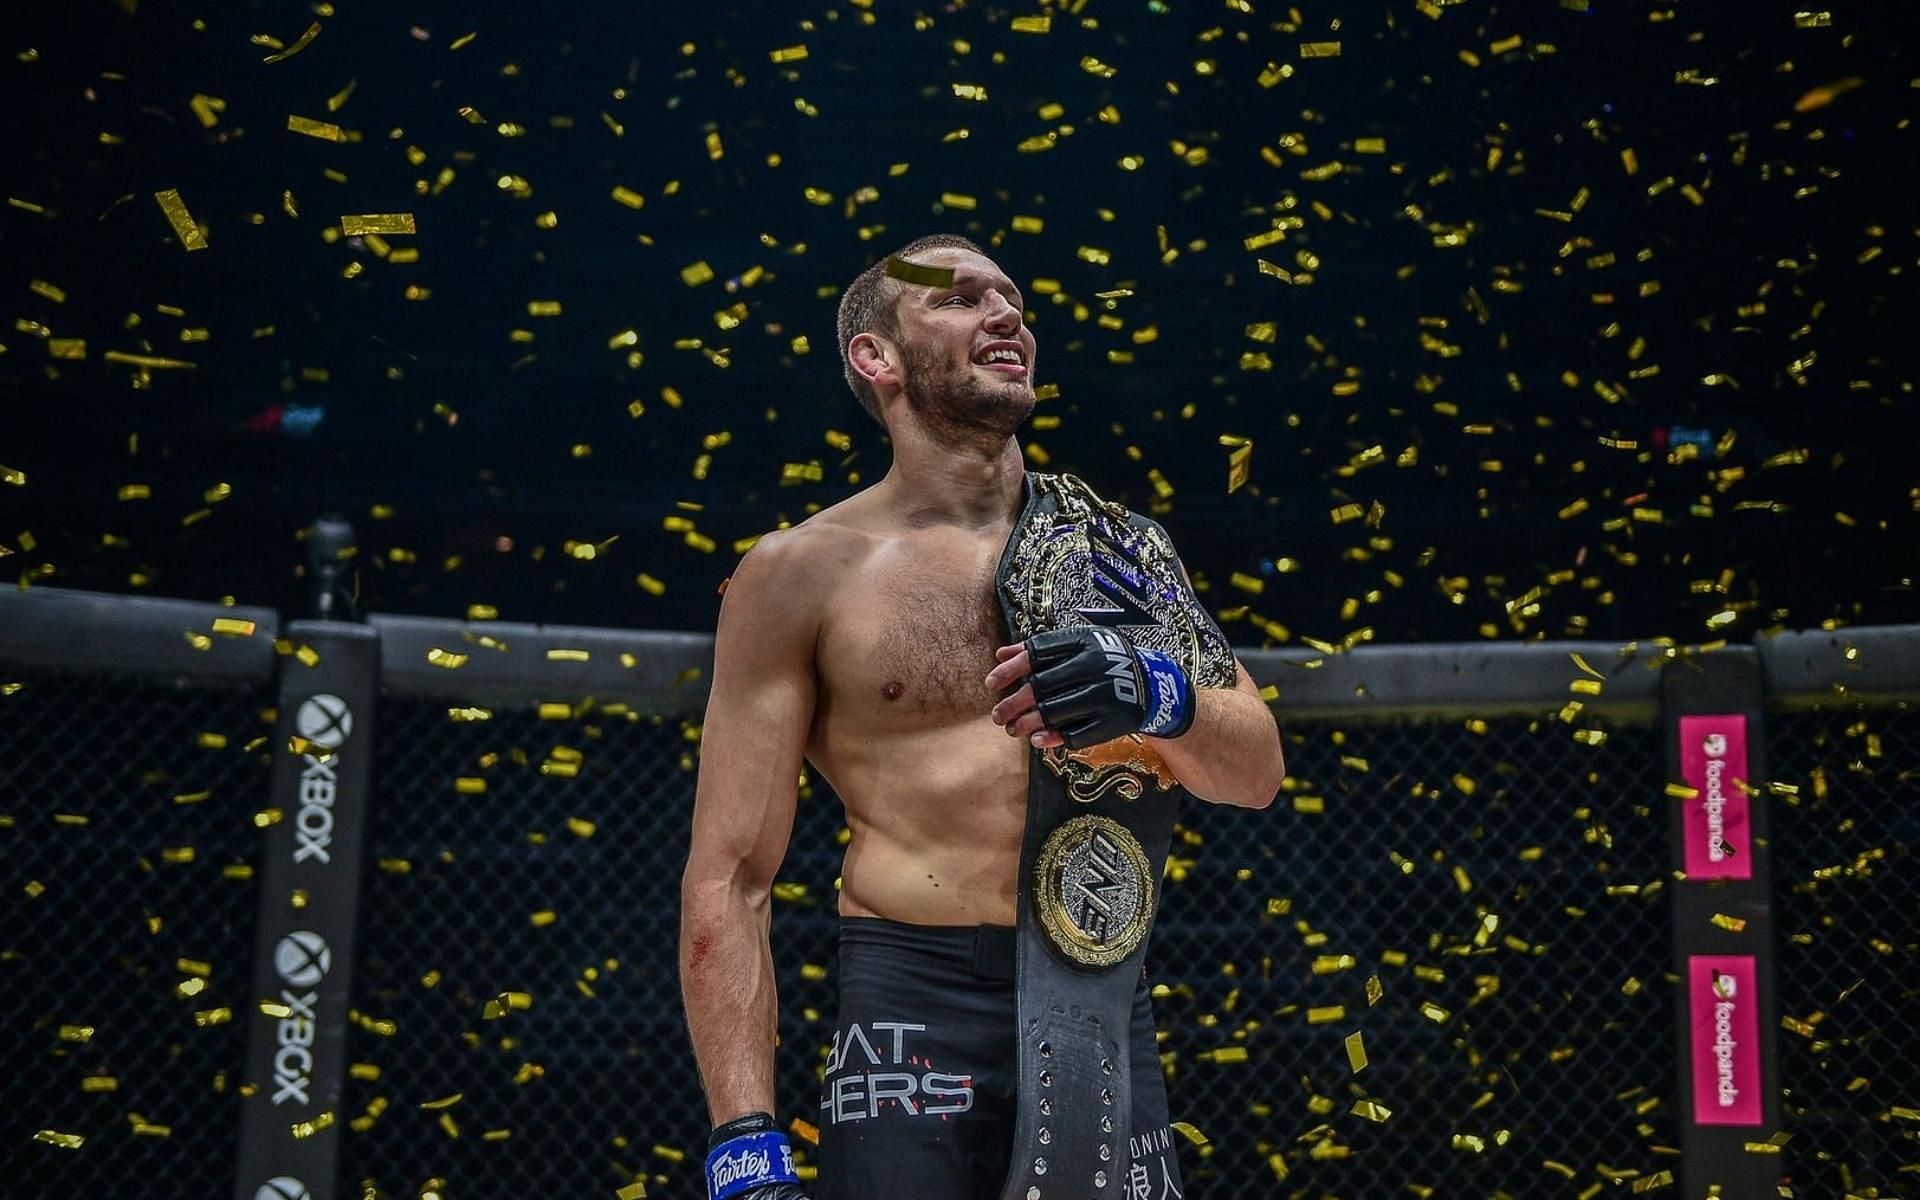 ONE Championship double champ Reinier de Ridder might make history in 2022 and become the first triple-division champ in MMA. (Image courtesy of ONE Championship)